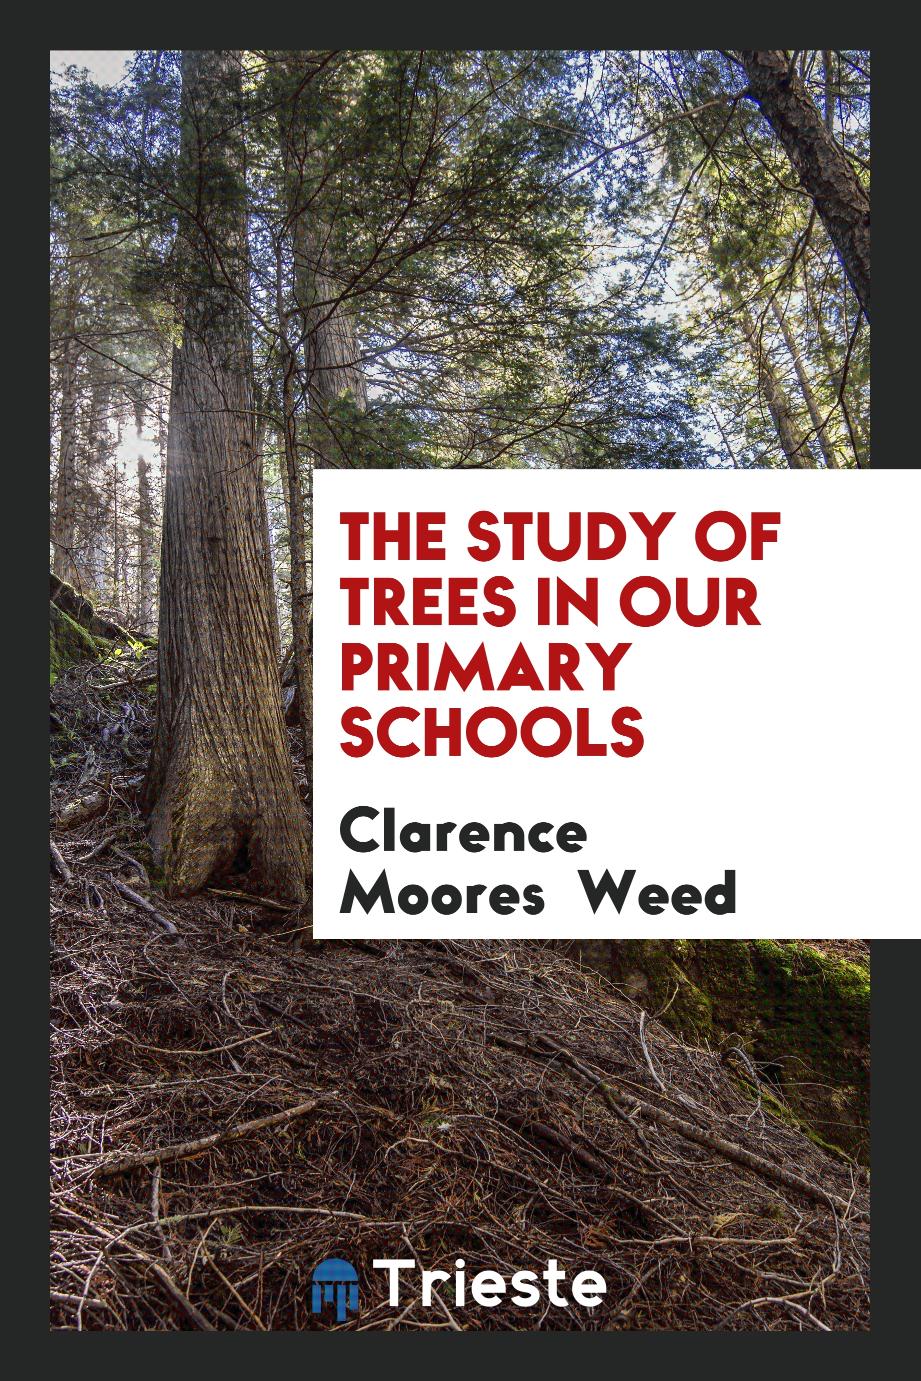 Clarence Moores Weed - The study of trees in our primary schools